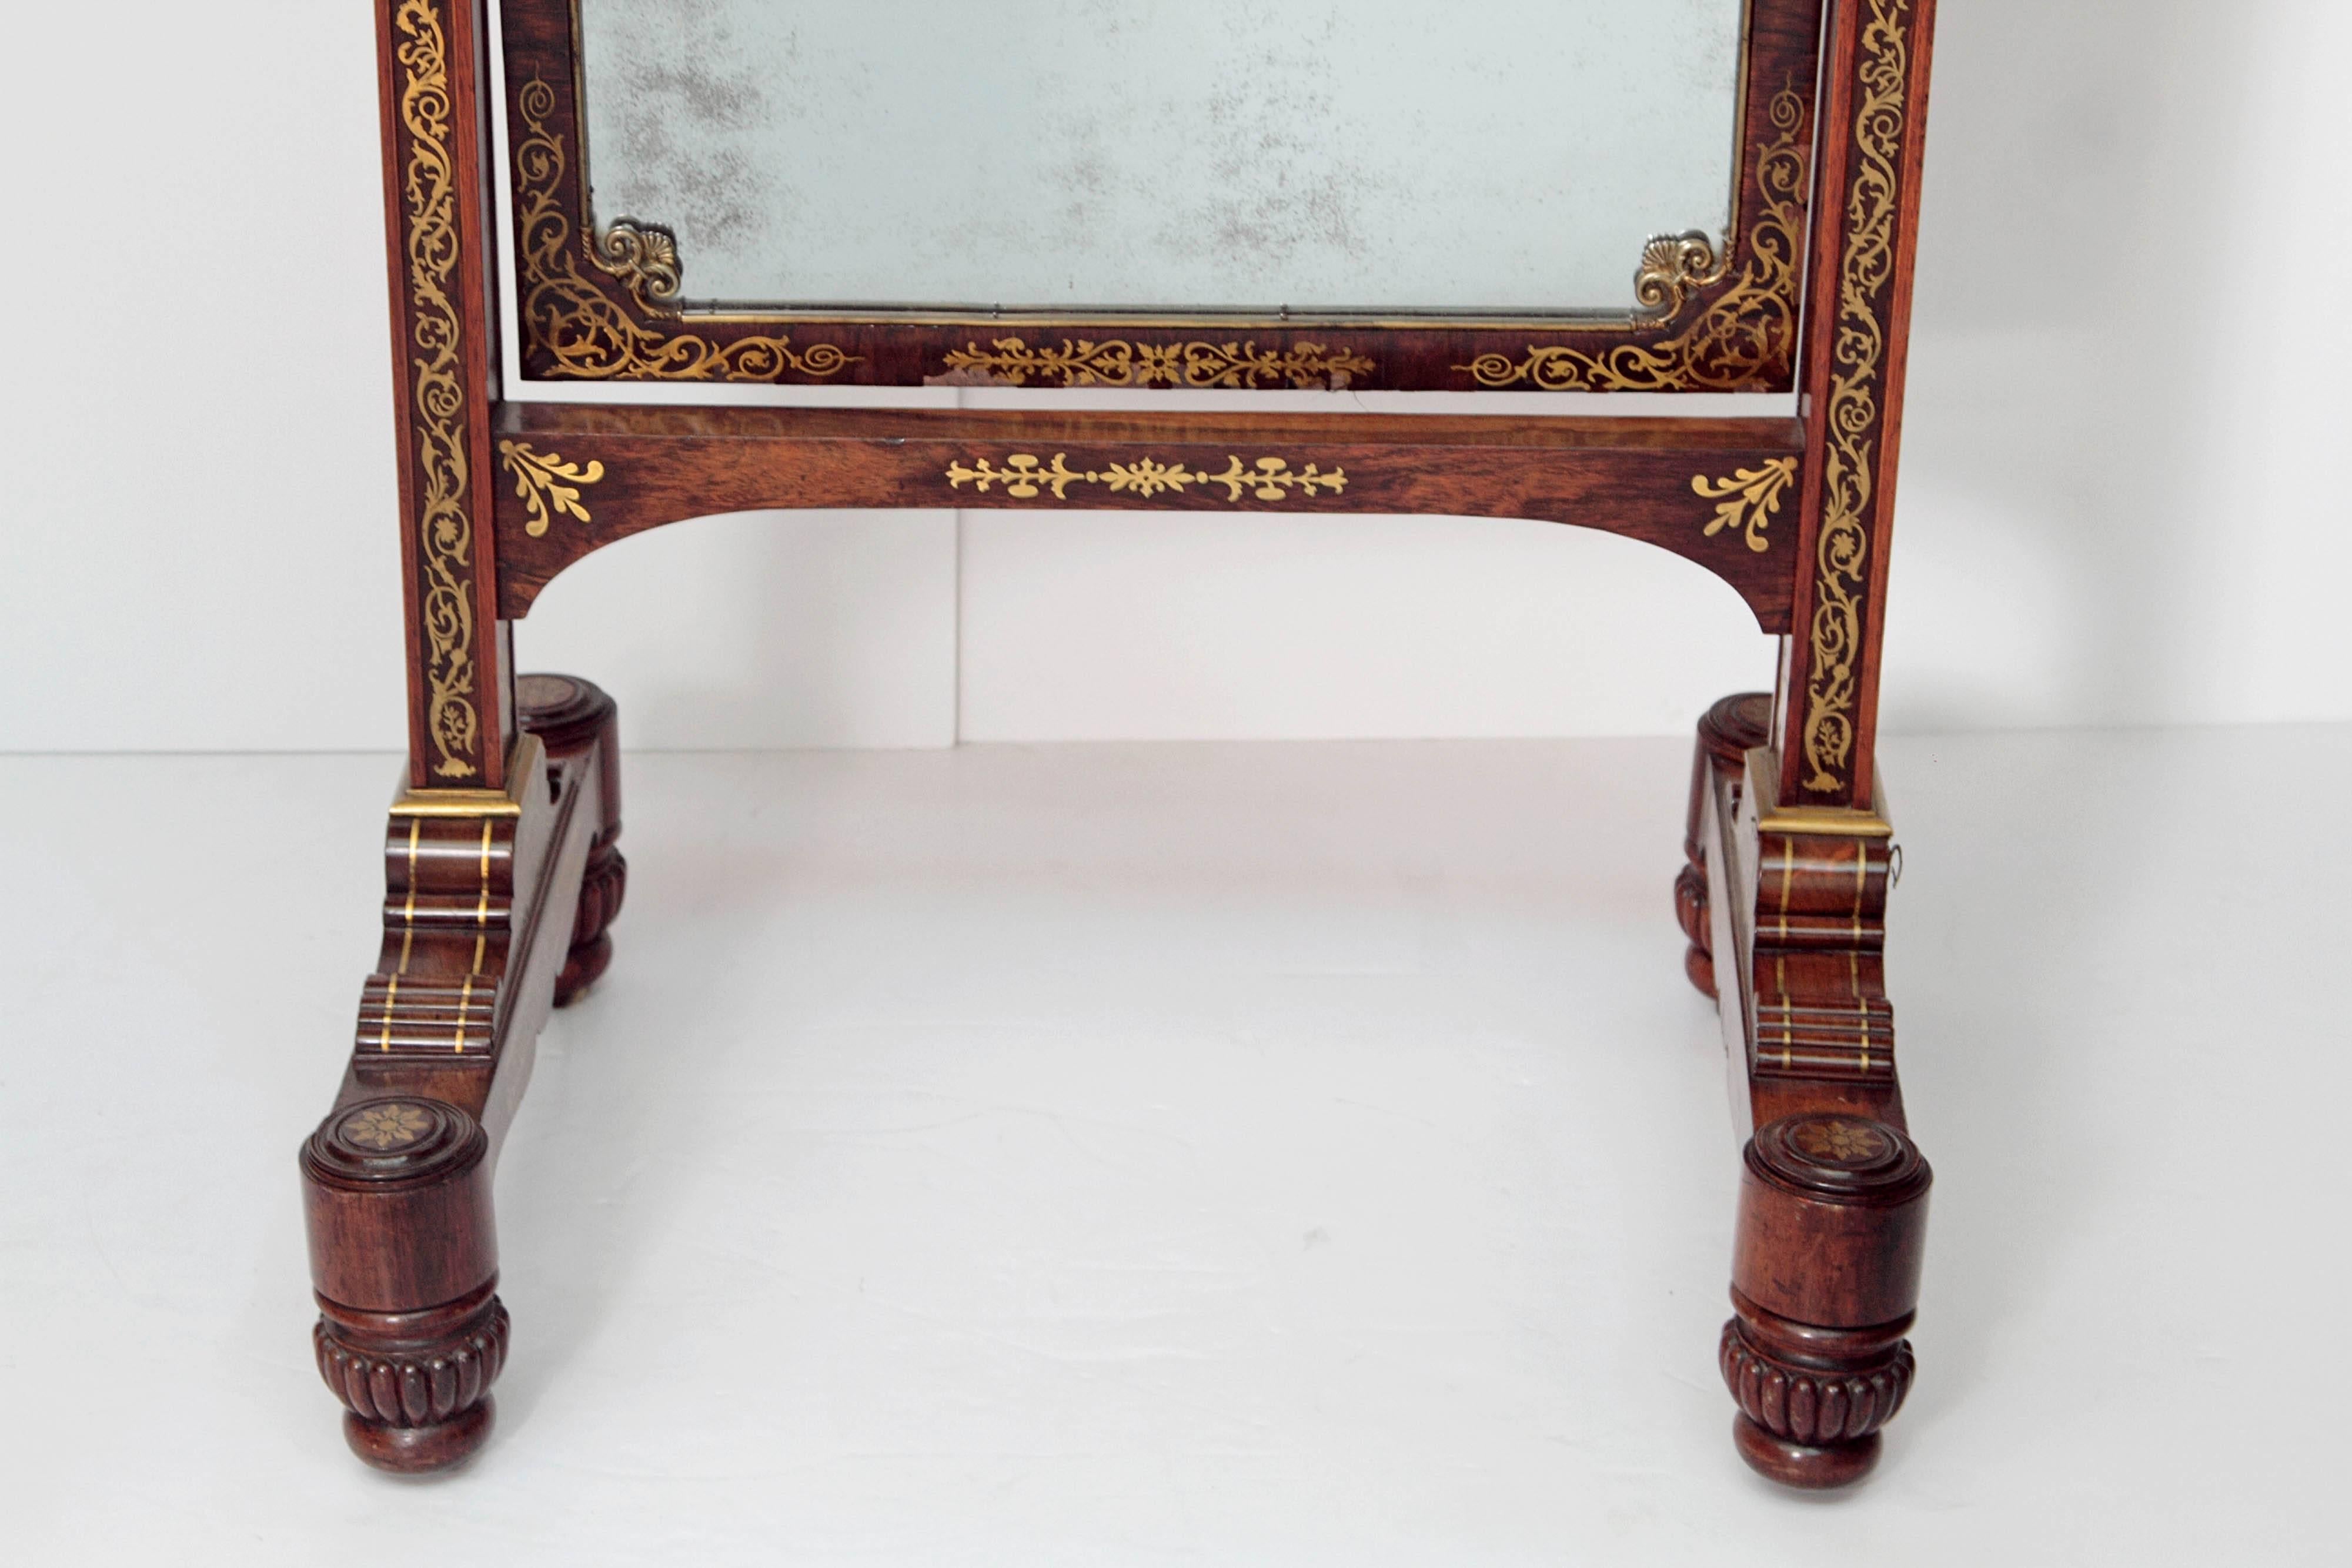 English Regency neoclassical rosewood cheval mirror elaborately decorated with brass inlay.